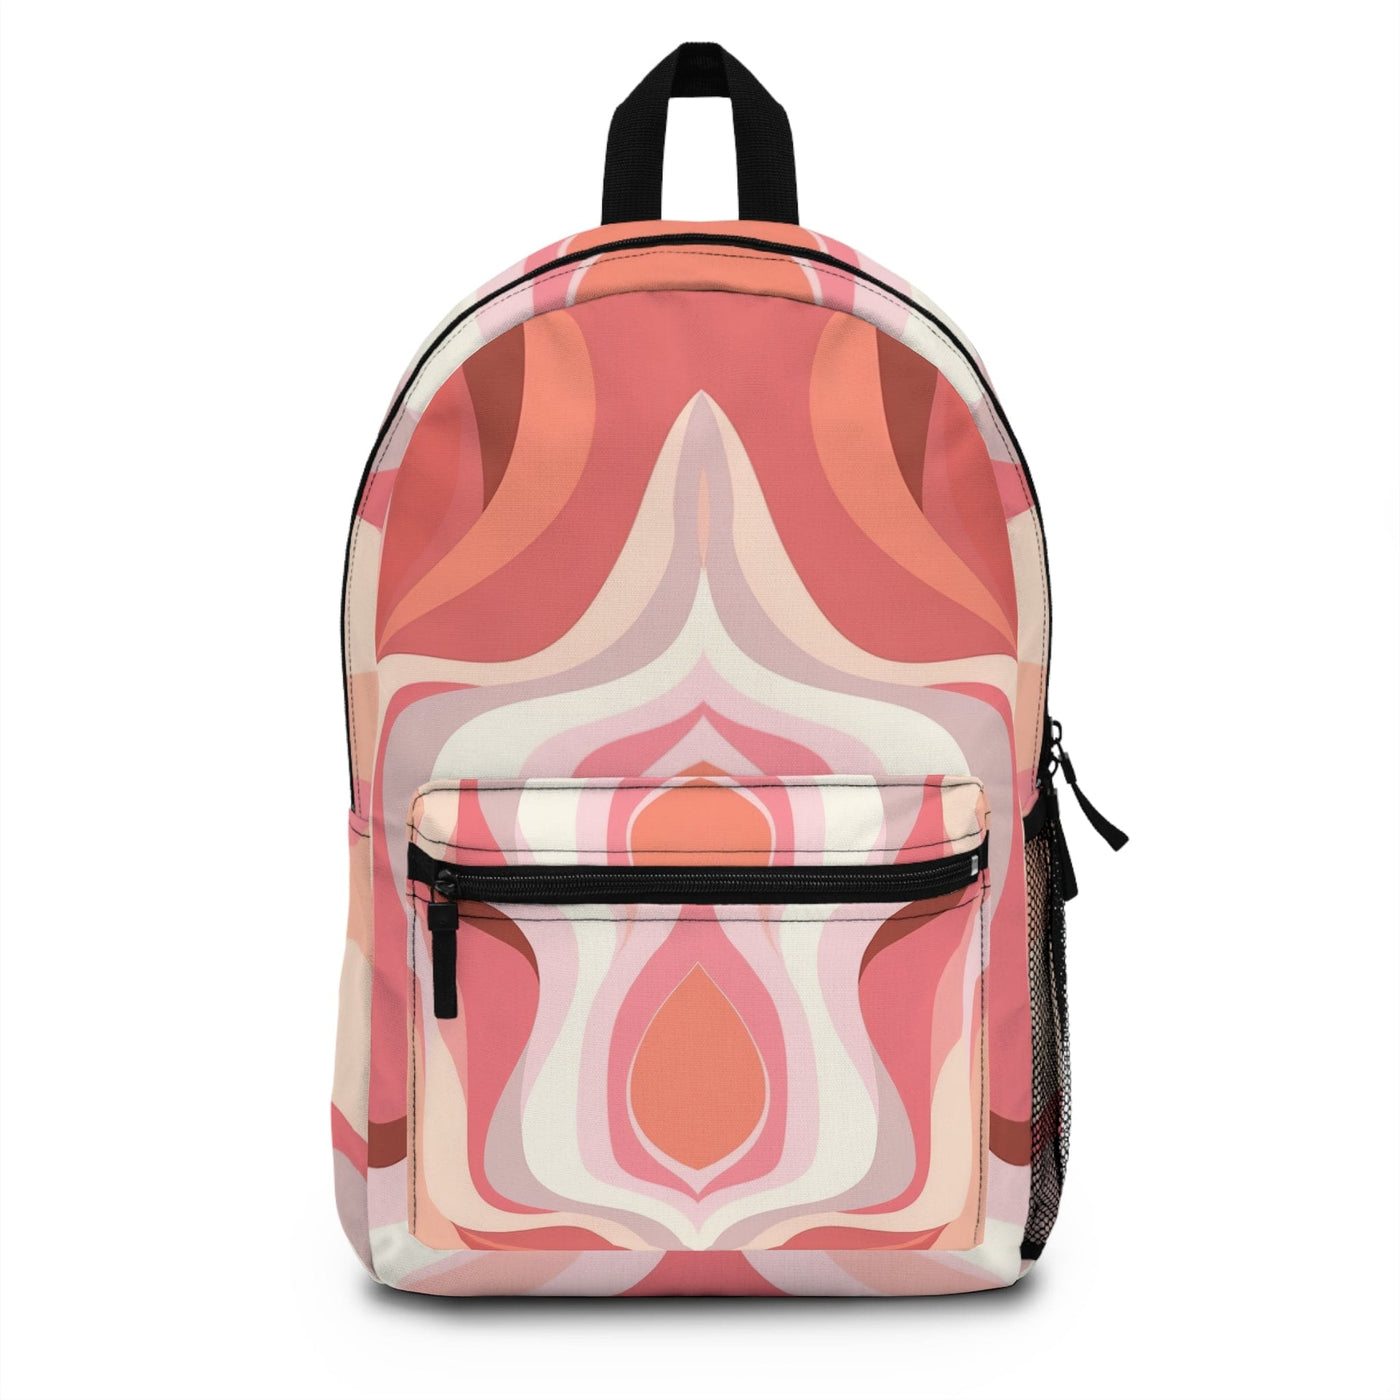 Backpack Work/school/leisure - Waterproof Boho Pink And White Contemporary Art